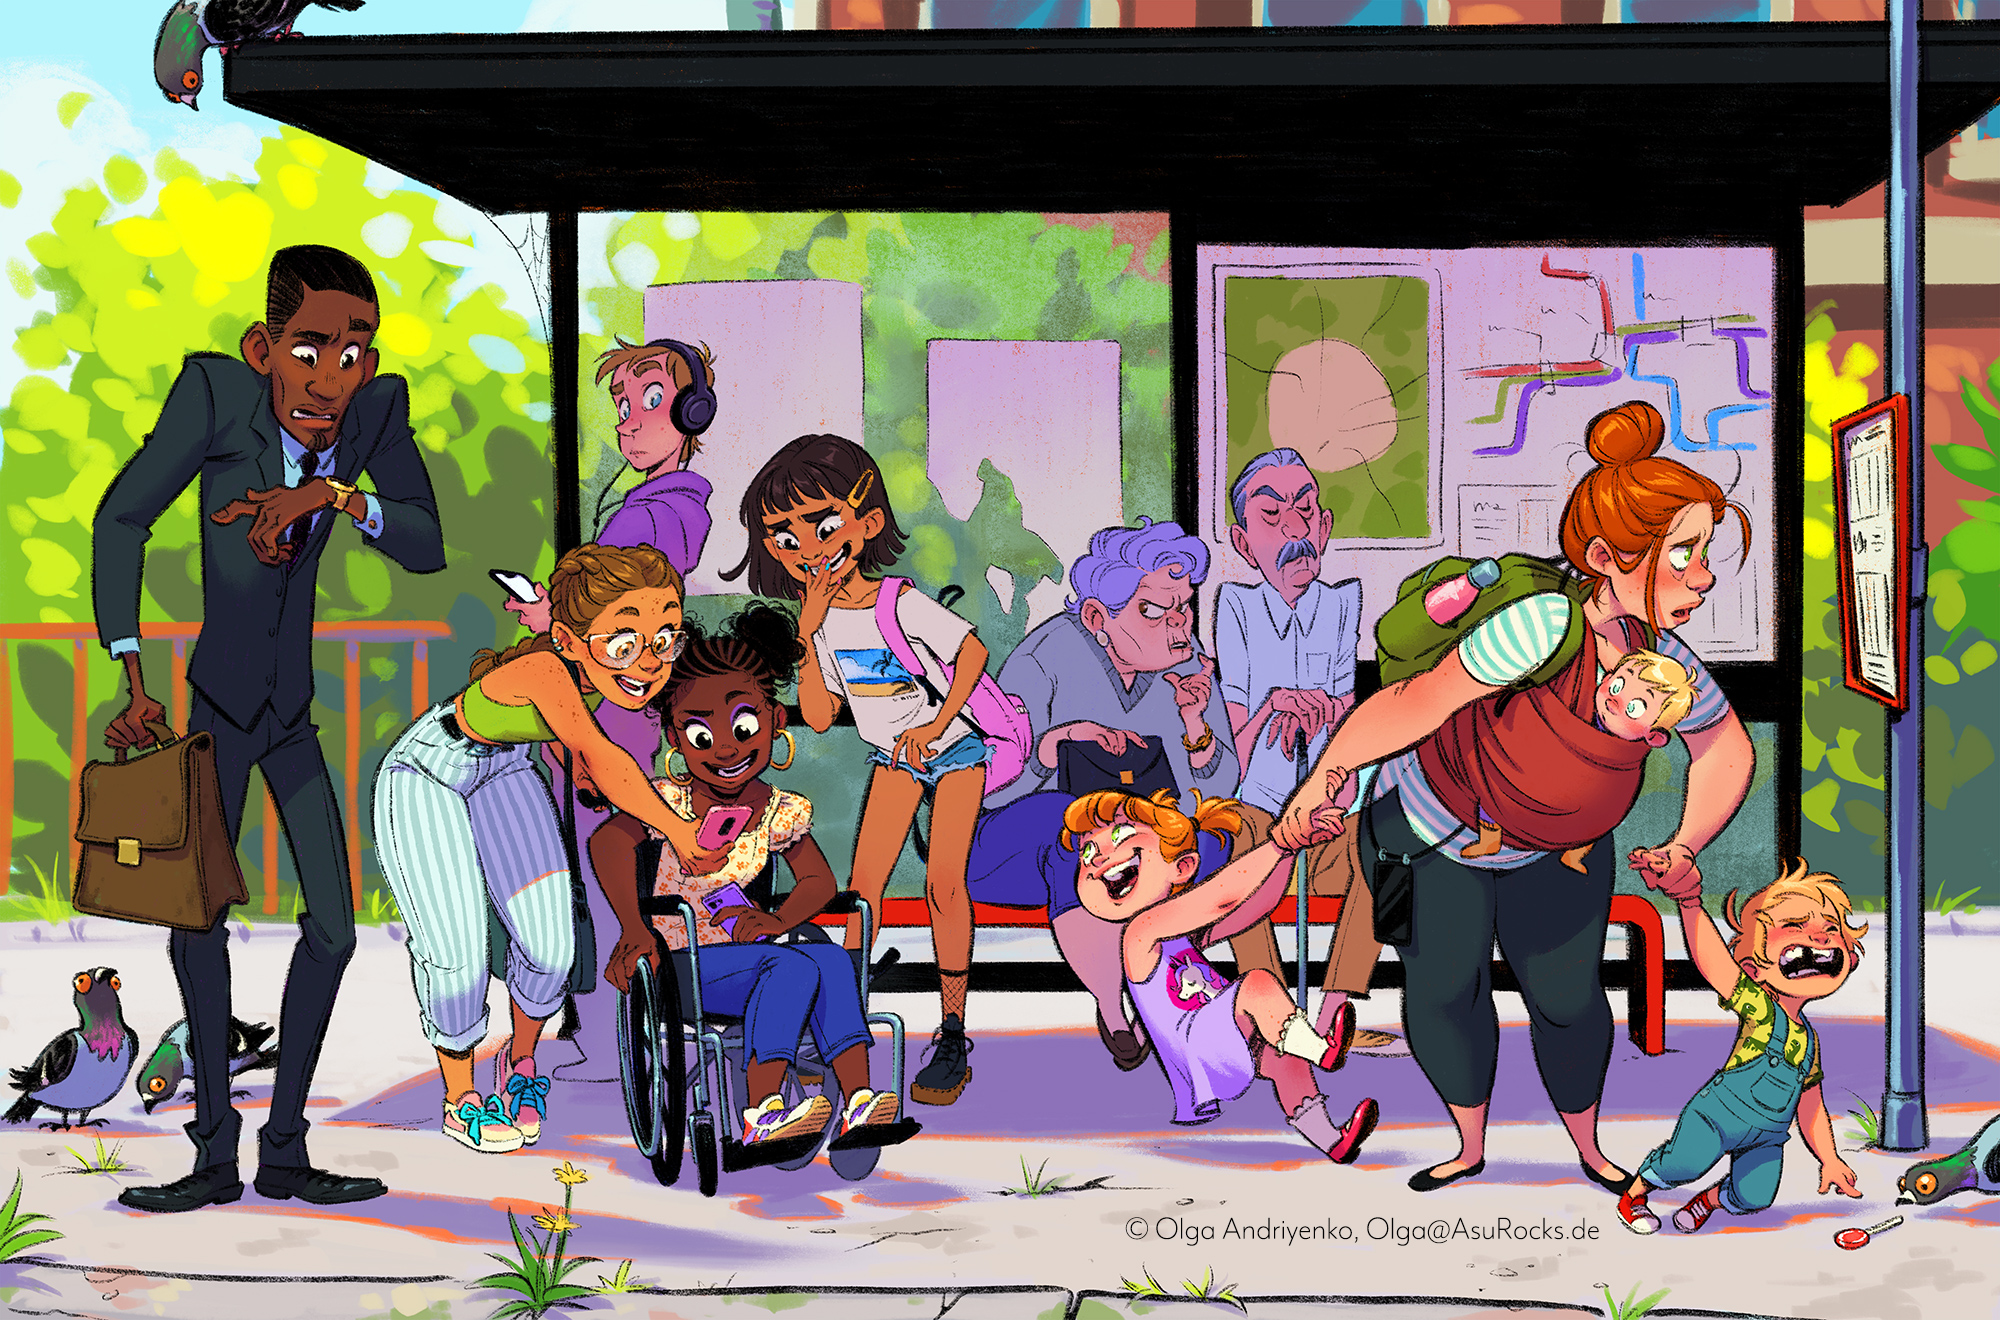 bus stop illustration with diverse characters